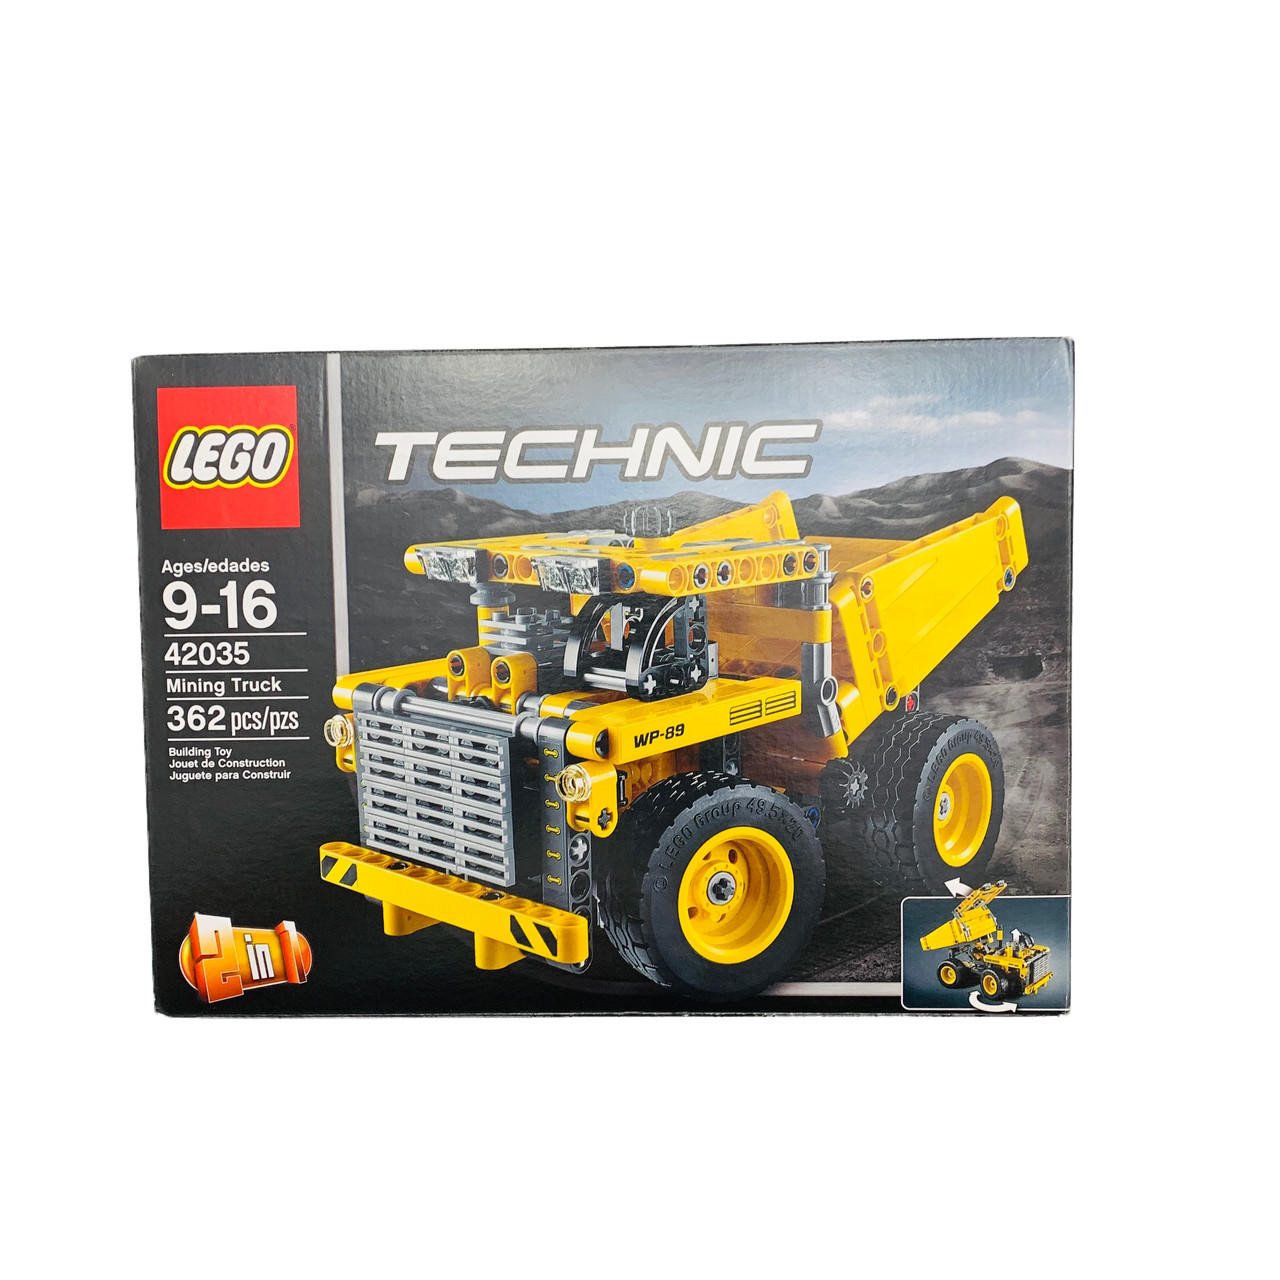 LEGO Technic Mining Truck Features Huge Wheels  moving Piston and Transmission 